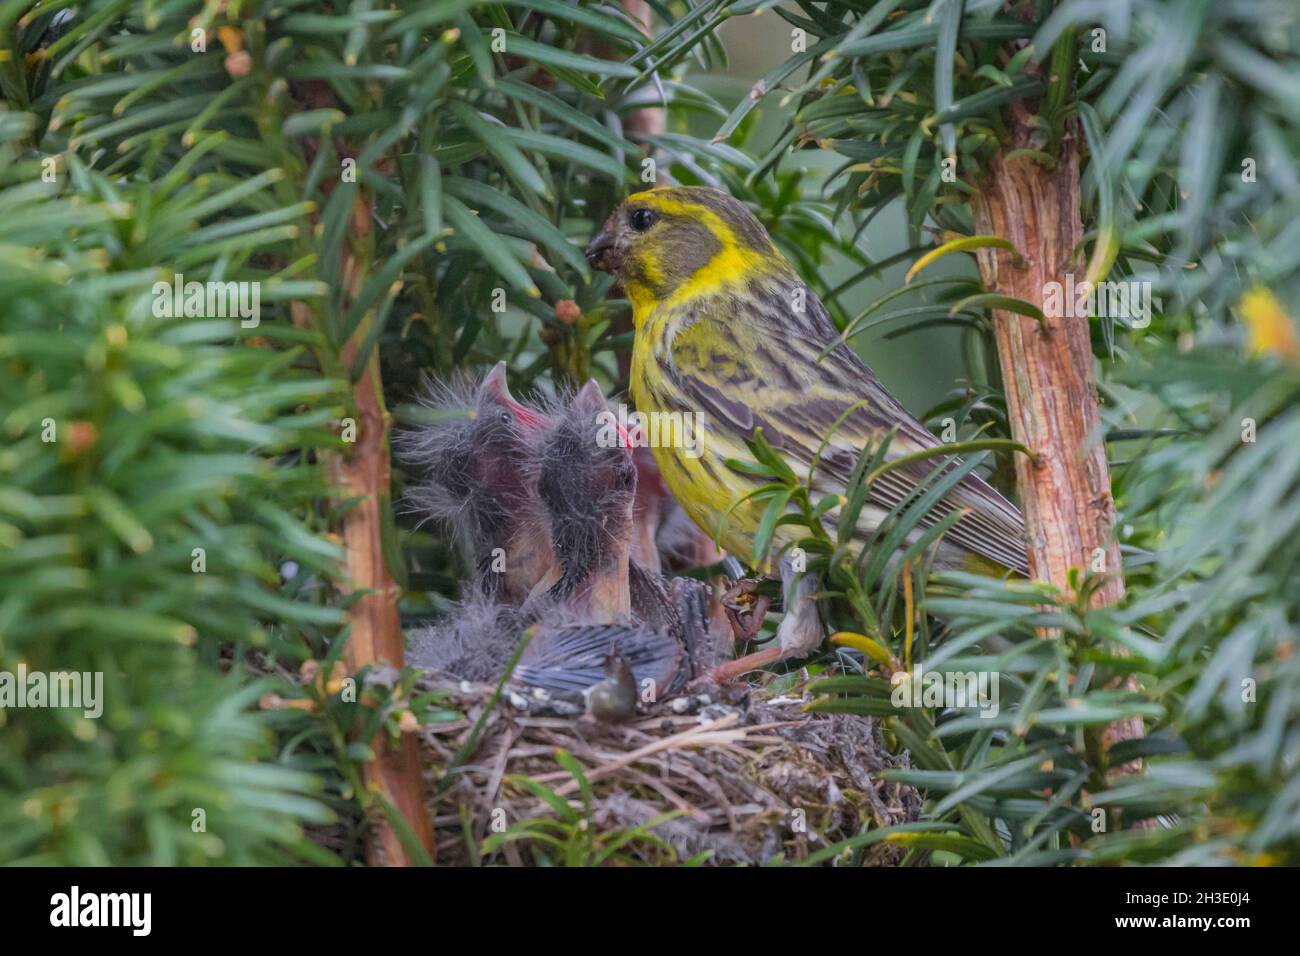 European serin (Serinus serinus), male feeding on the nest, young birds begging for food, Germany Stock Photo